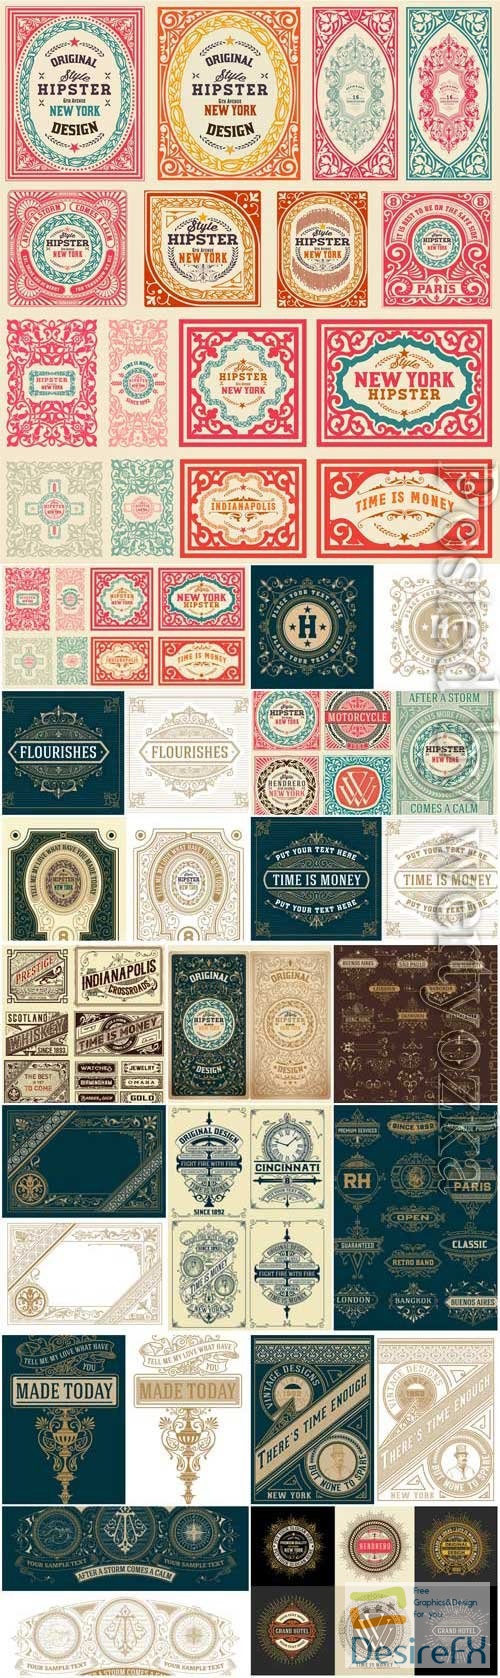 Retro labels and elements in vector